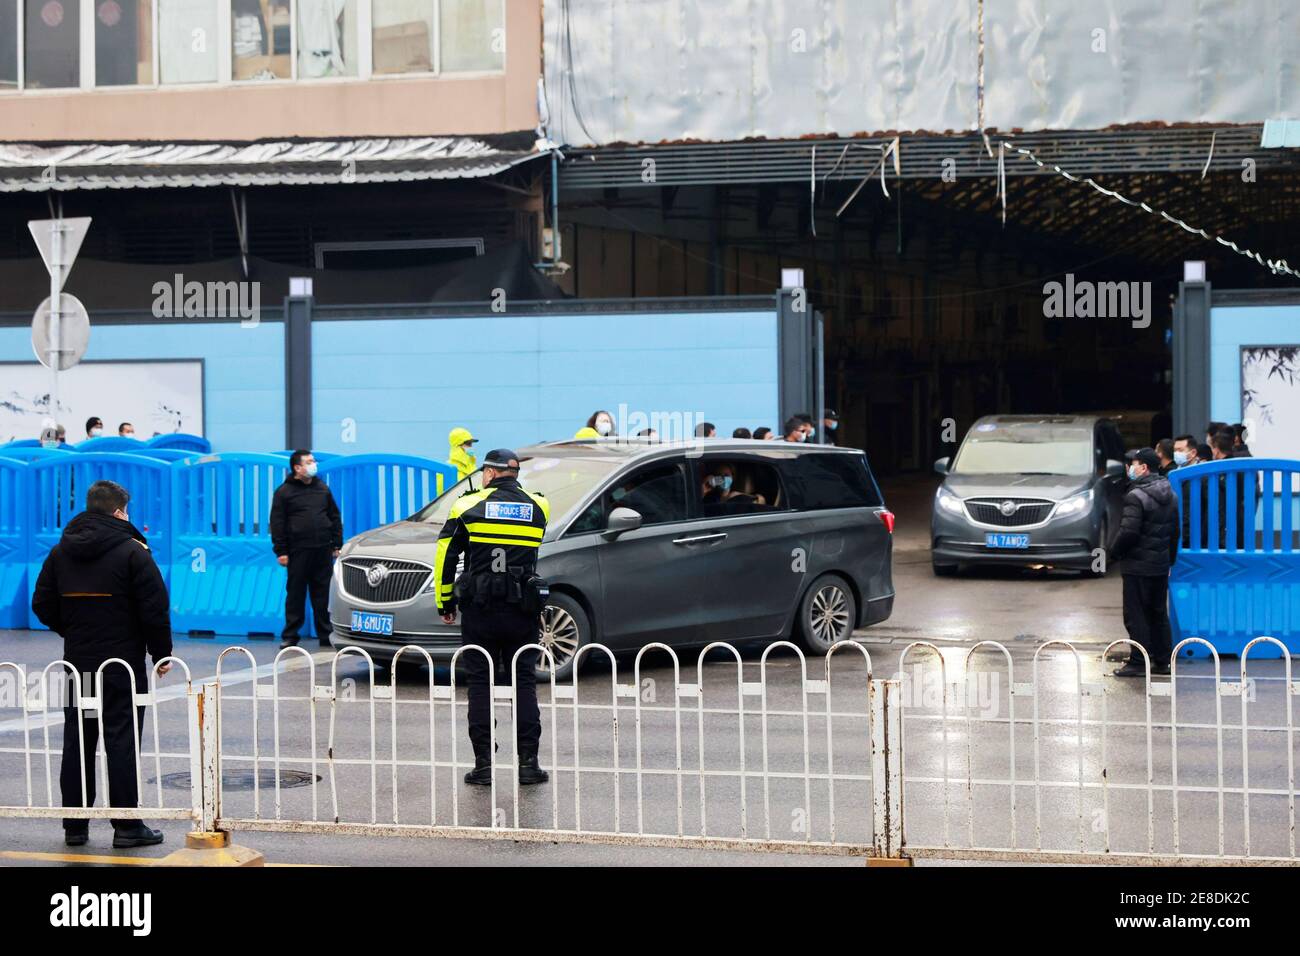 Cars carrying members of the World Health Organization (WHO) team tasked with investigating the origins of the coronavirus disease (COVID-19) leave Huanan seafood market in Wuhan, Hubei province, China January 31, 2021. REUTERS/Thomas Peter Stock Photo